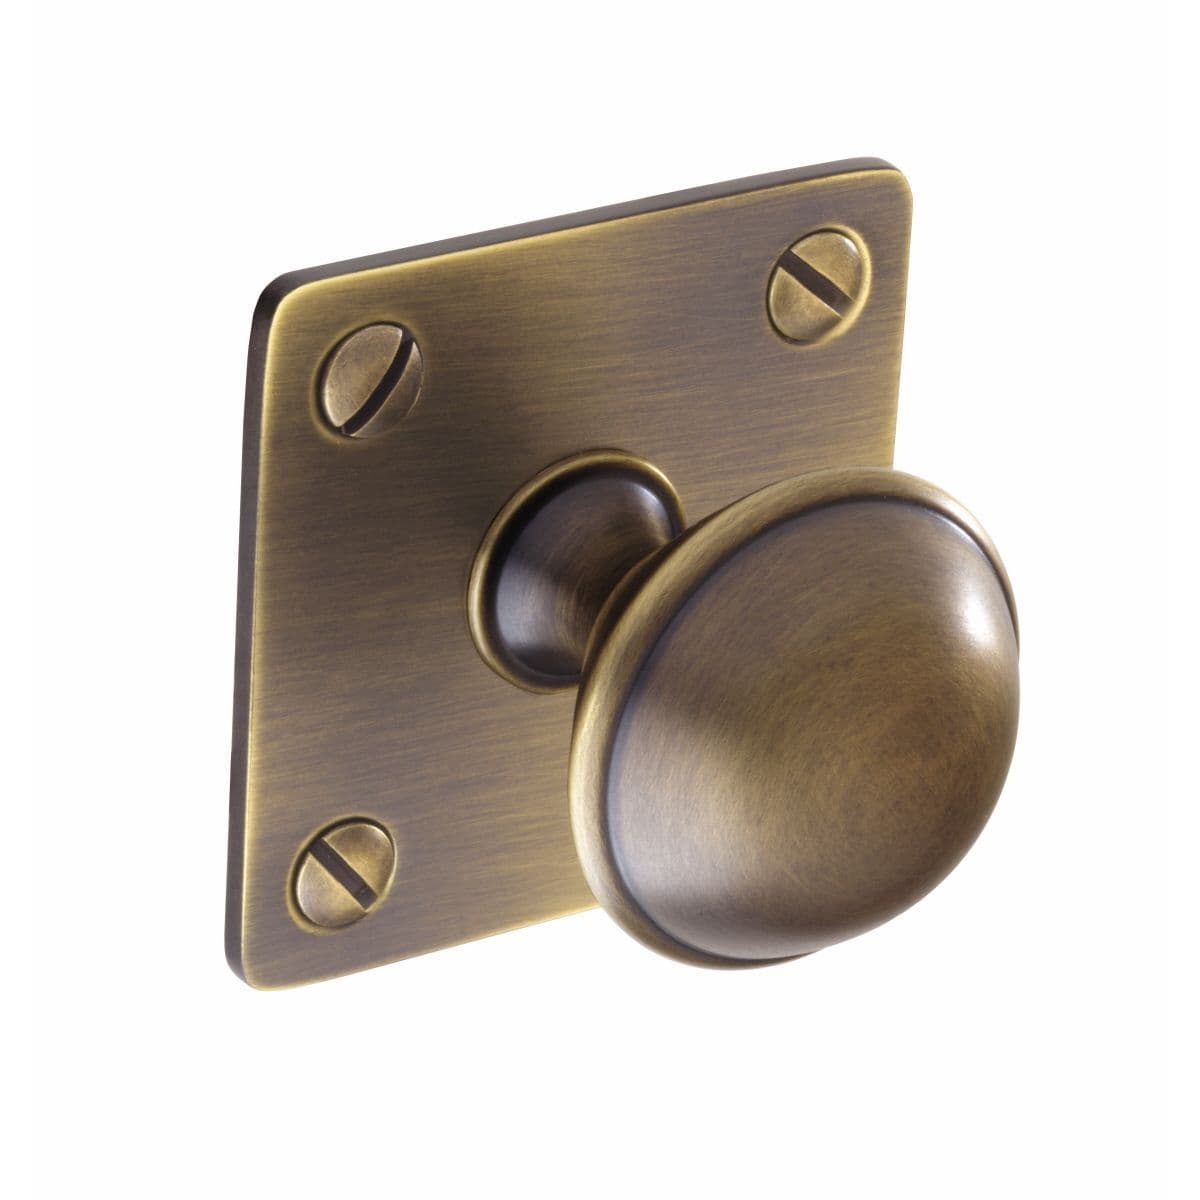 WELLINGTON ROUND KNOB on BACKPLATE Cupboard Handle - 32mm diameter - 3 finishes (PWS K1075.32)